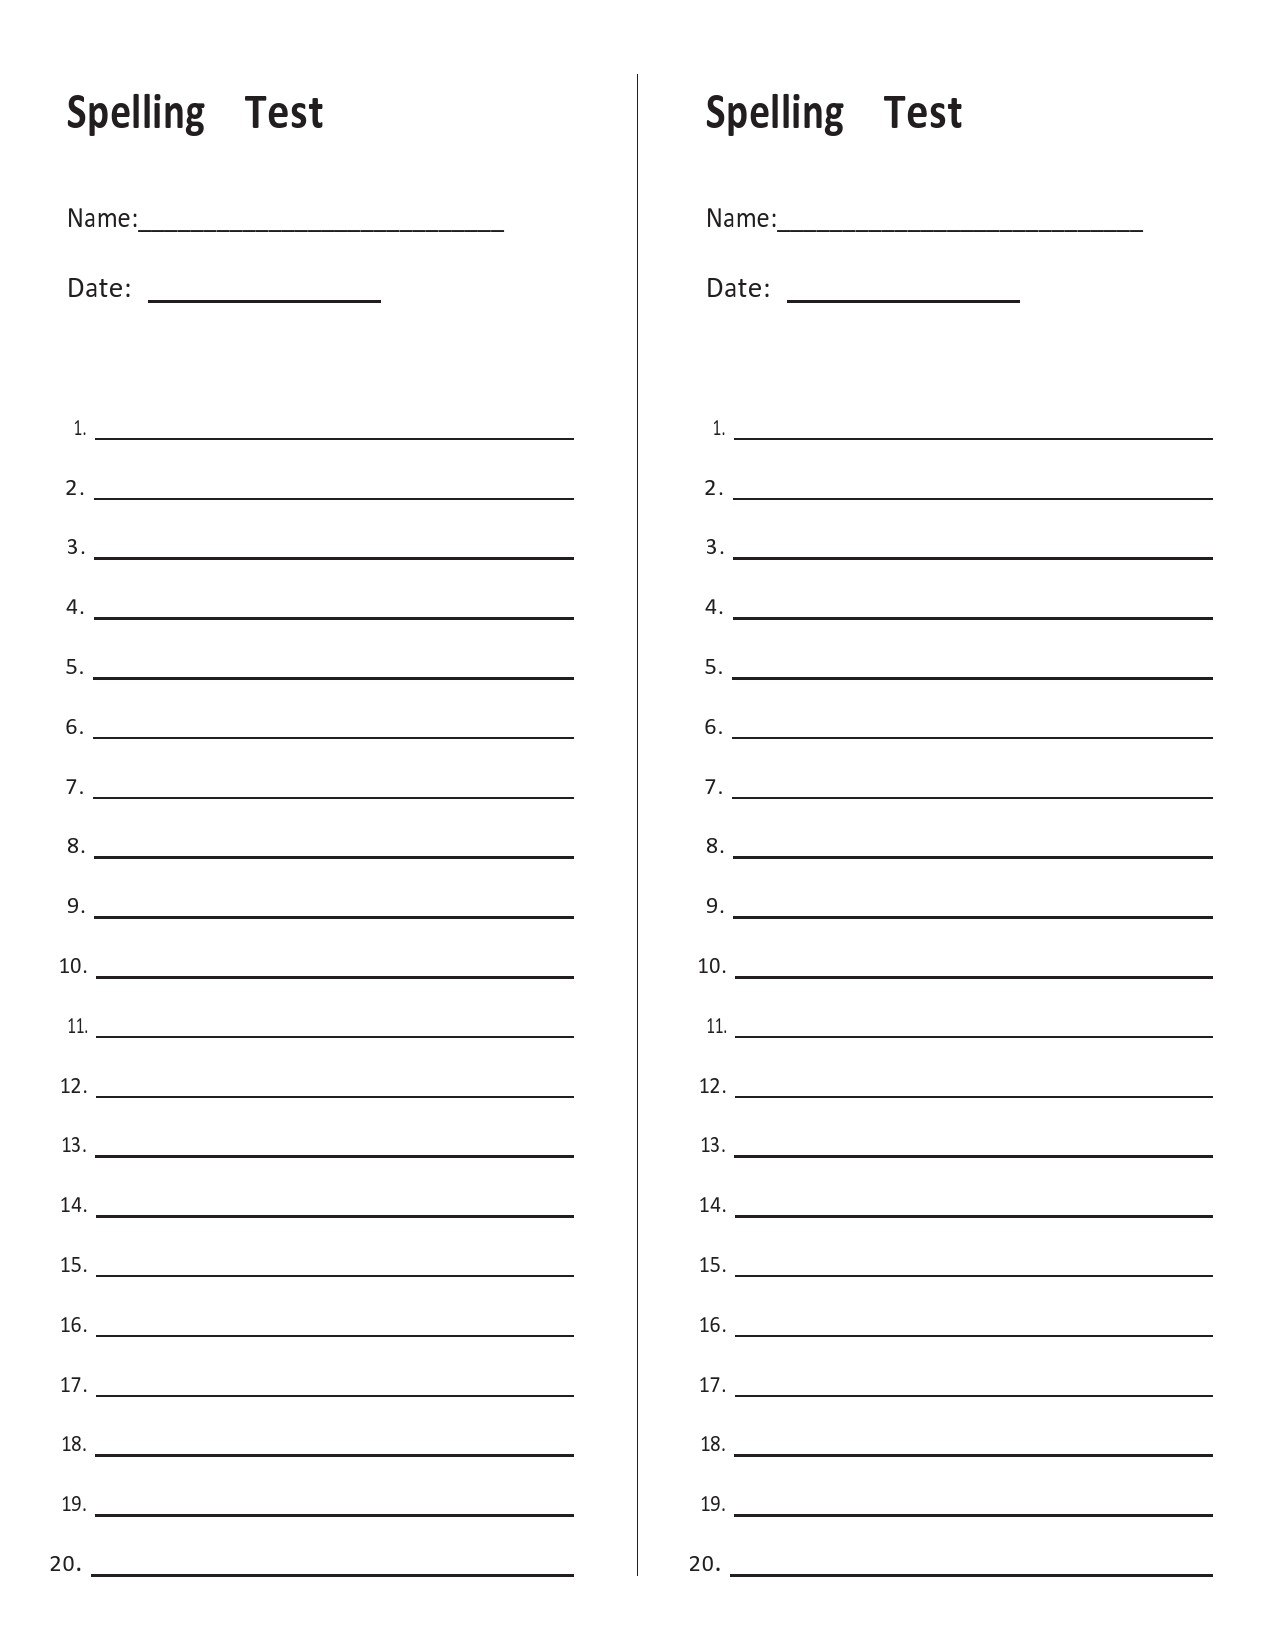 Free spelling test template 38